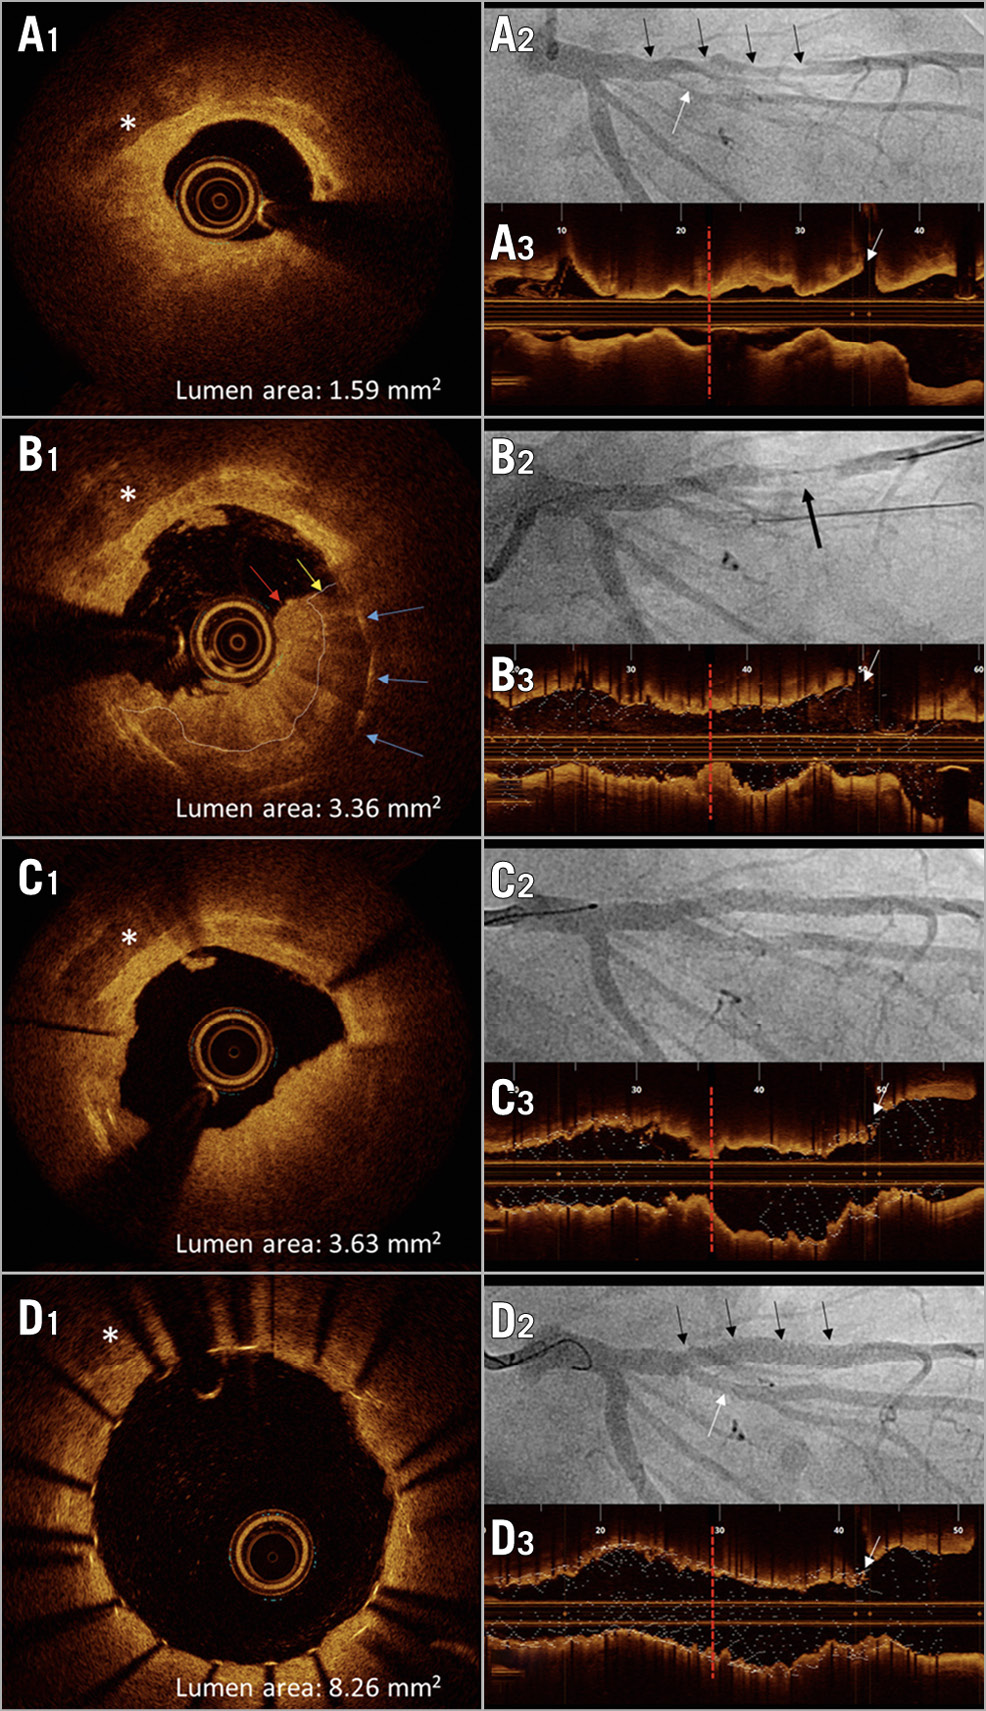 Figure 1. Stent thrombosis due to atheromatous protrusion after stenting. Left: cross-sectional OCT images (A1-D1; *=calcification) at four stages. Right: corresponding coronary angiographies (A2-D2; black arrows=LAD; white arrows=diagonal branch) and longitudinal OCT views of LAD (A3-D3; red vertical bars indicate site of stent thrombosis and correspond to site of OCT cross-sections; white arrows=diagonal branch). A1-A3. Pre-interventional OCT/angiography: circumferential, predominantly lipid-rich plaque (A1). B1-B3. OCT/angiography of stent thrombosis (arrow in B2): OCT (B1) shows thrombus (red arrow) attached to atheromatous protrusion (yellow arrow), blue arrows=buried stent struts. C1-C3. OCT/angiography two days later: residual stenosis due to protruding mass (C1). D1-D3. Final OCT/angiography: protruding material successfully compressed by additional stent, achieving good lumen area.